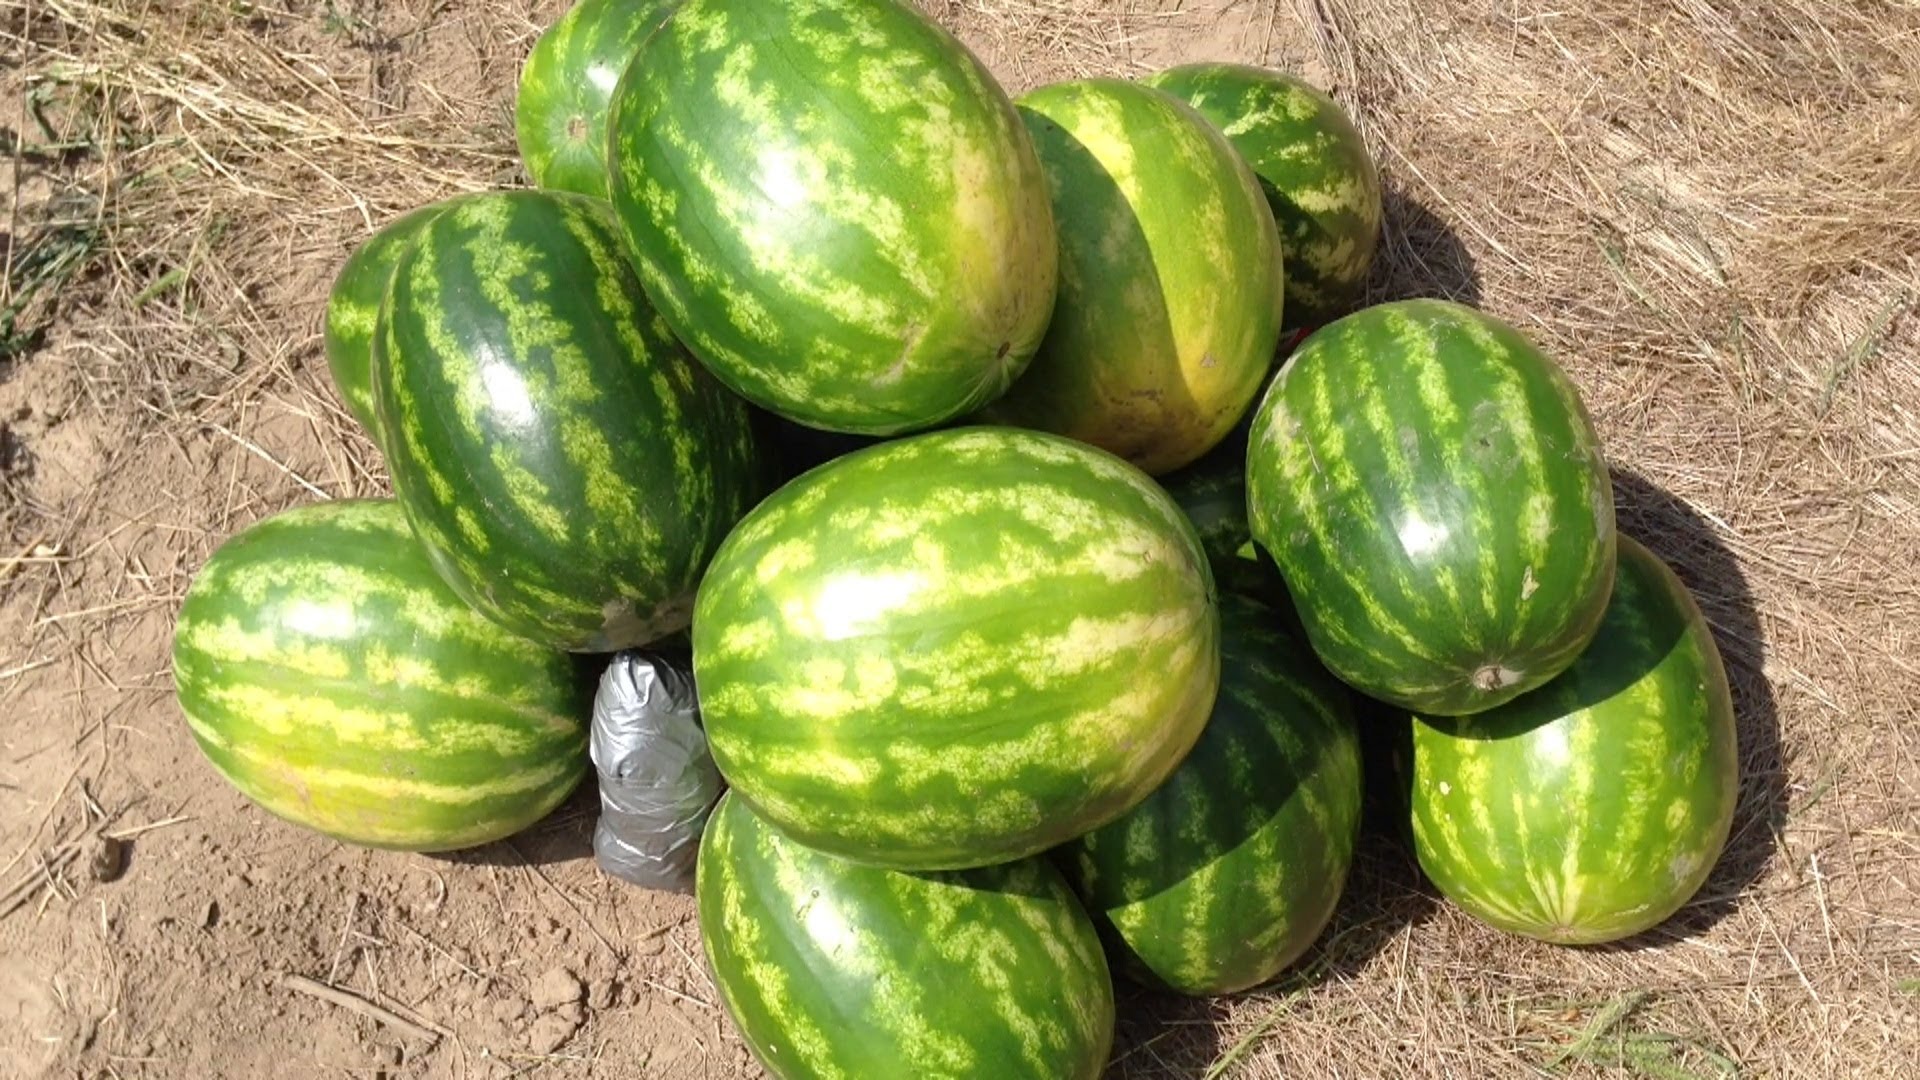 HUGE Watermelon Explosion! 2lbs & A Pile Of Watermelon! - YouTube